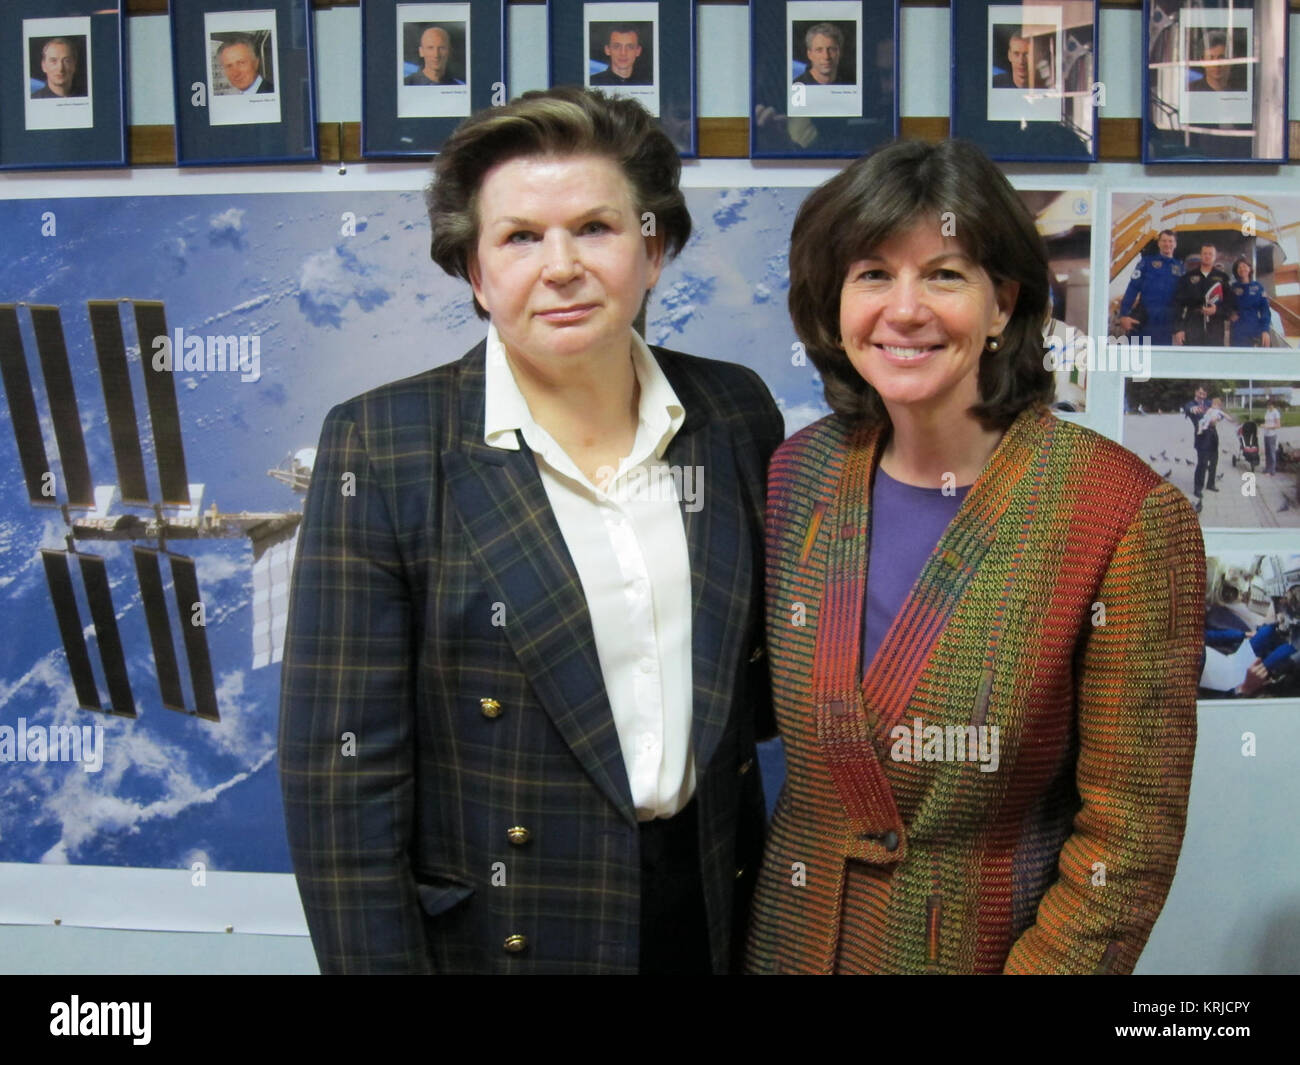 At the Gagarin Cosmonaut Training Center in Star City, Russia, Expedition 26 Flight Engineer Catherine Coleman of NASA (right) meets with Valentina Tereshkova, the first woman to fly in space, on the eve of Coleman’s departure for the Baikonur Cosmodrome in Kazakhstan, where she and her crewmates, Dmitry Kondratyev and Paolo Nespoli of the European Space Agency will launch December 16, Baikonur time, on the Soyuz TMA-20 spacecraft to the International Space Station. Tereshkova, 73, became the first woman to fly in space on June 16, 1963 aboard the Vostok 6 spacecraft.  Credit: NASA/Mike Fossum Stock Photo